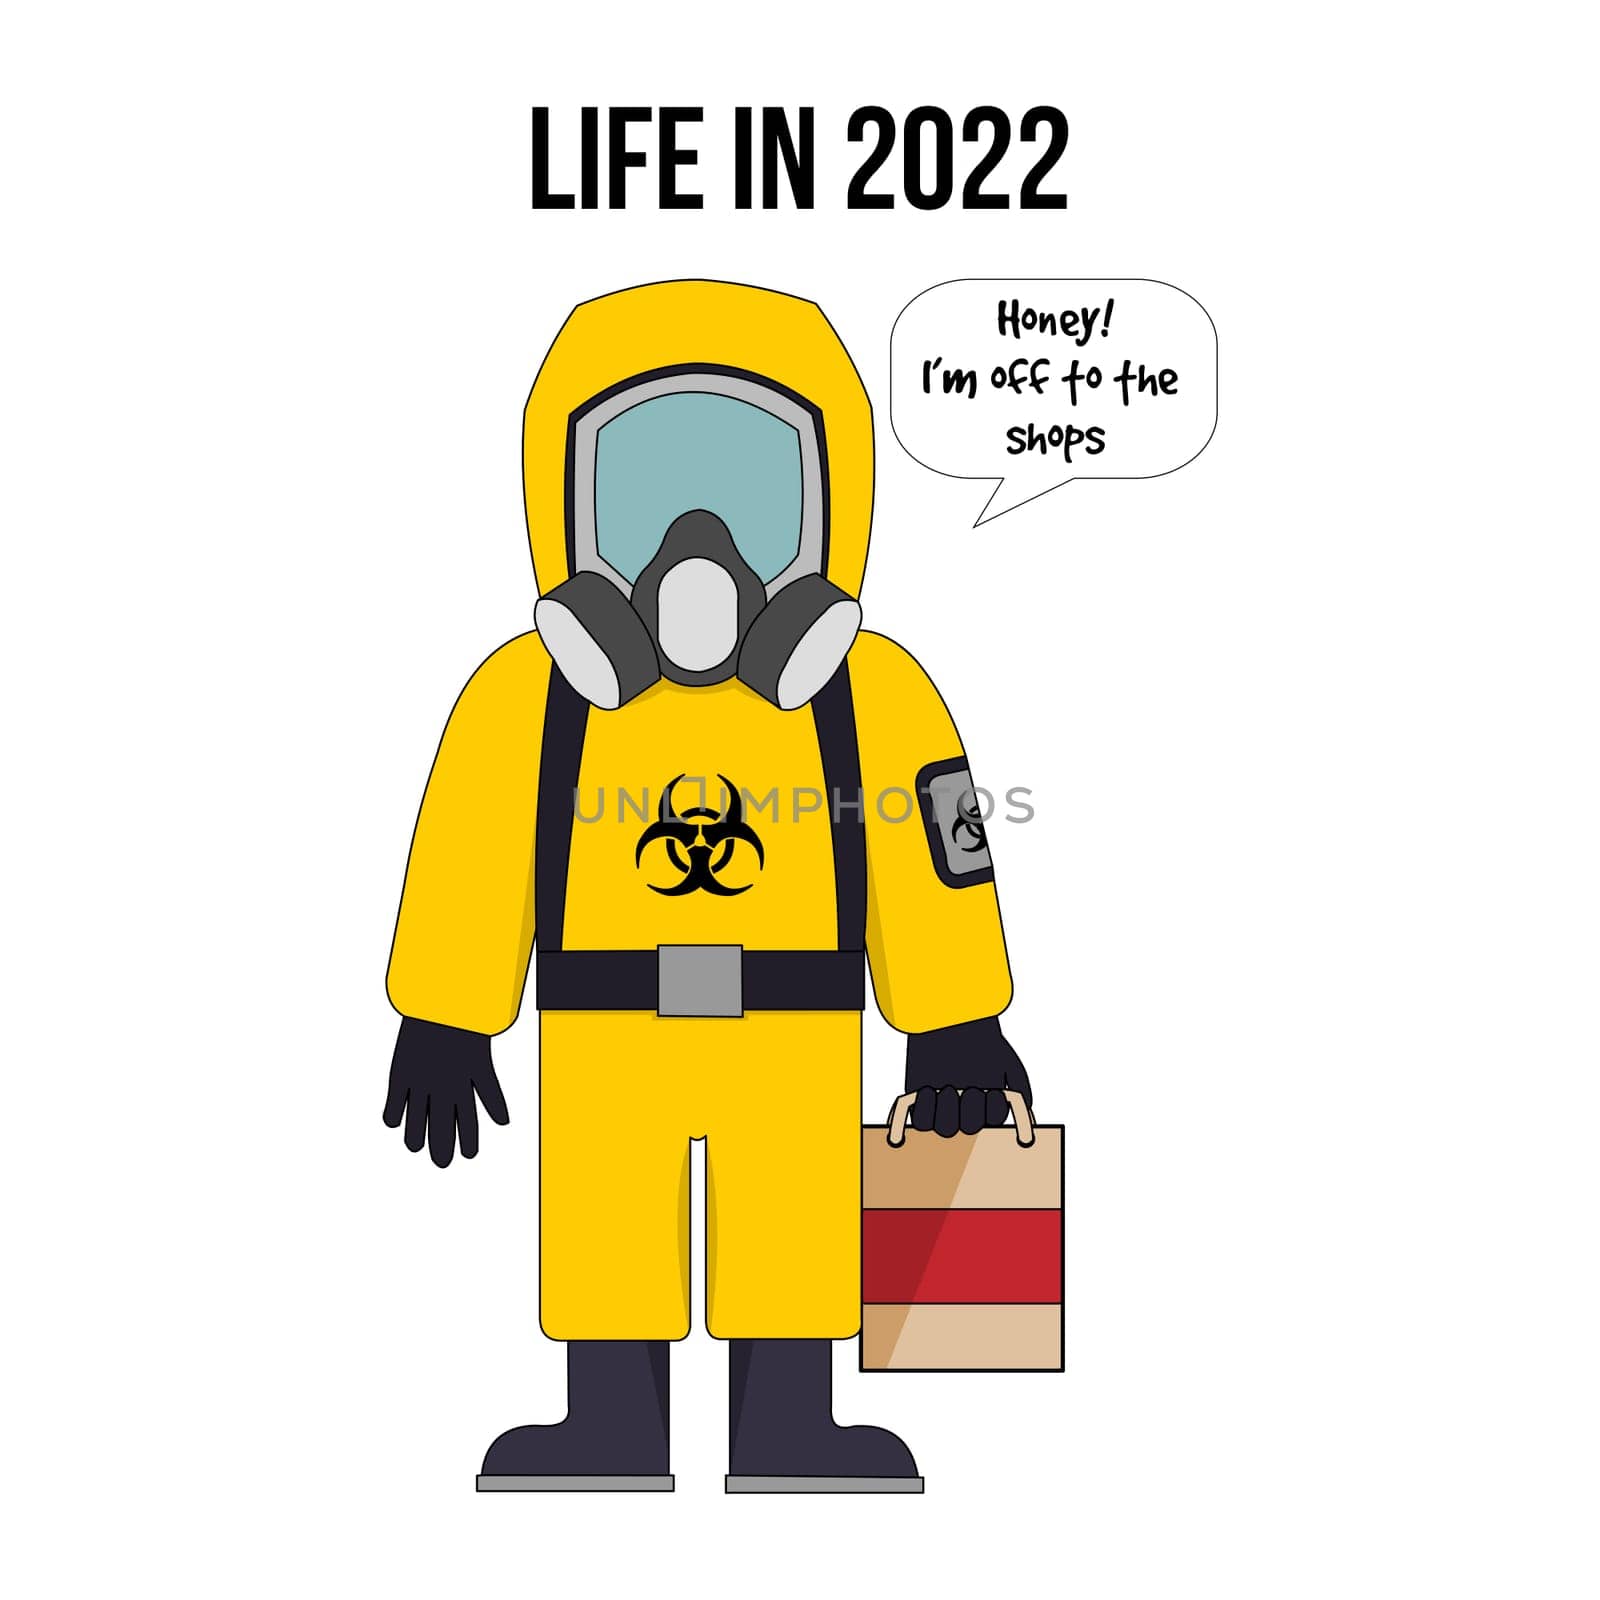 A person holding a carrier bag going to the shops wearing a hazard suit with the text "life in 2022".